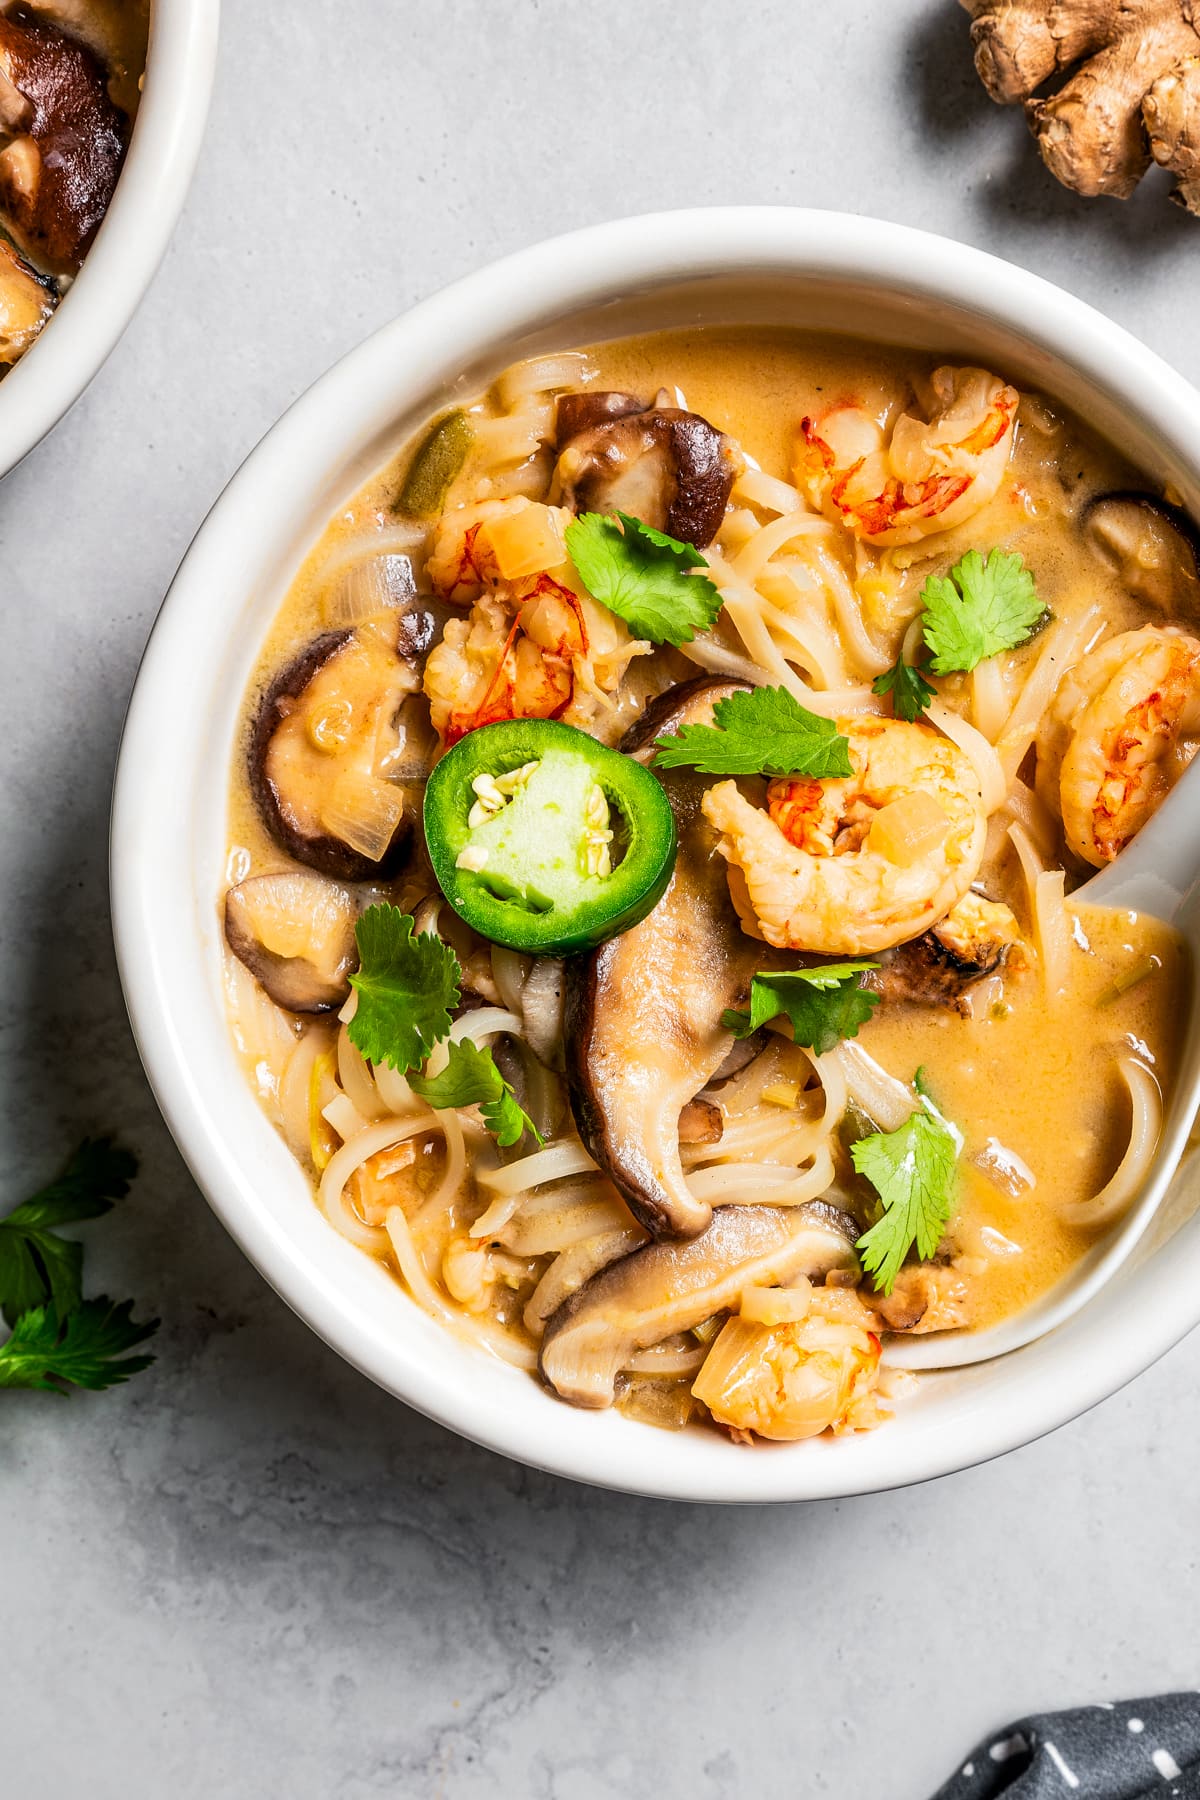 Overhead photo of tom yum noodle soup in a bowl, garnished with green peppers, herbs, and shrimp.